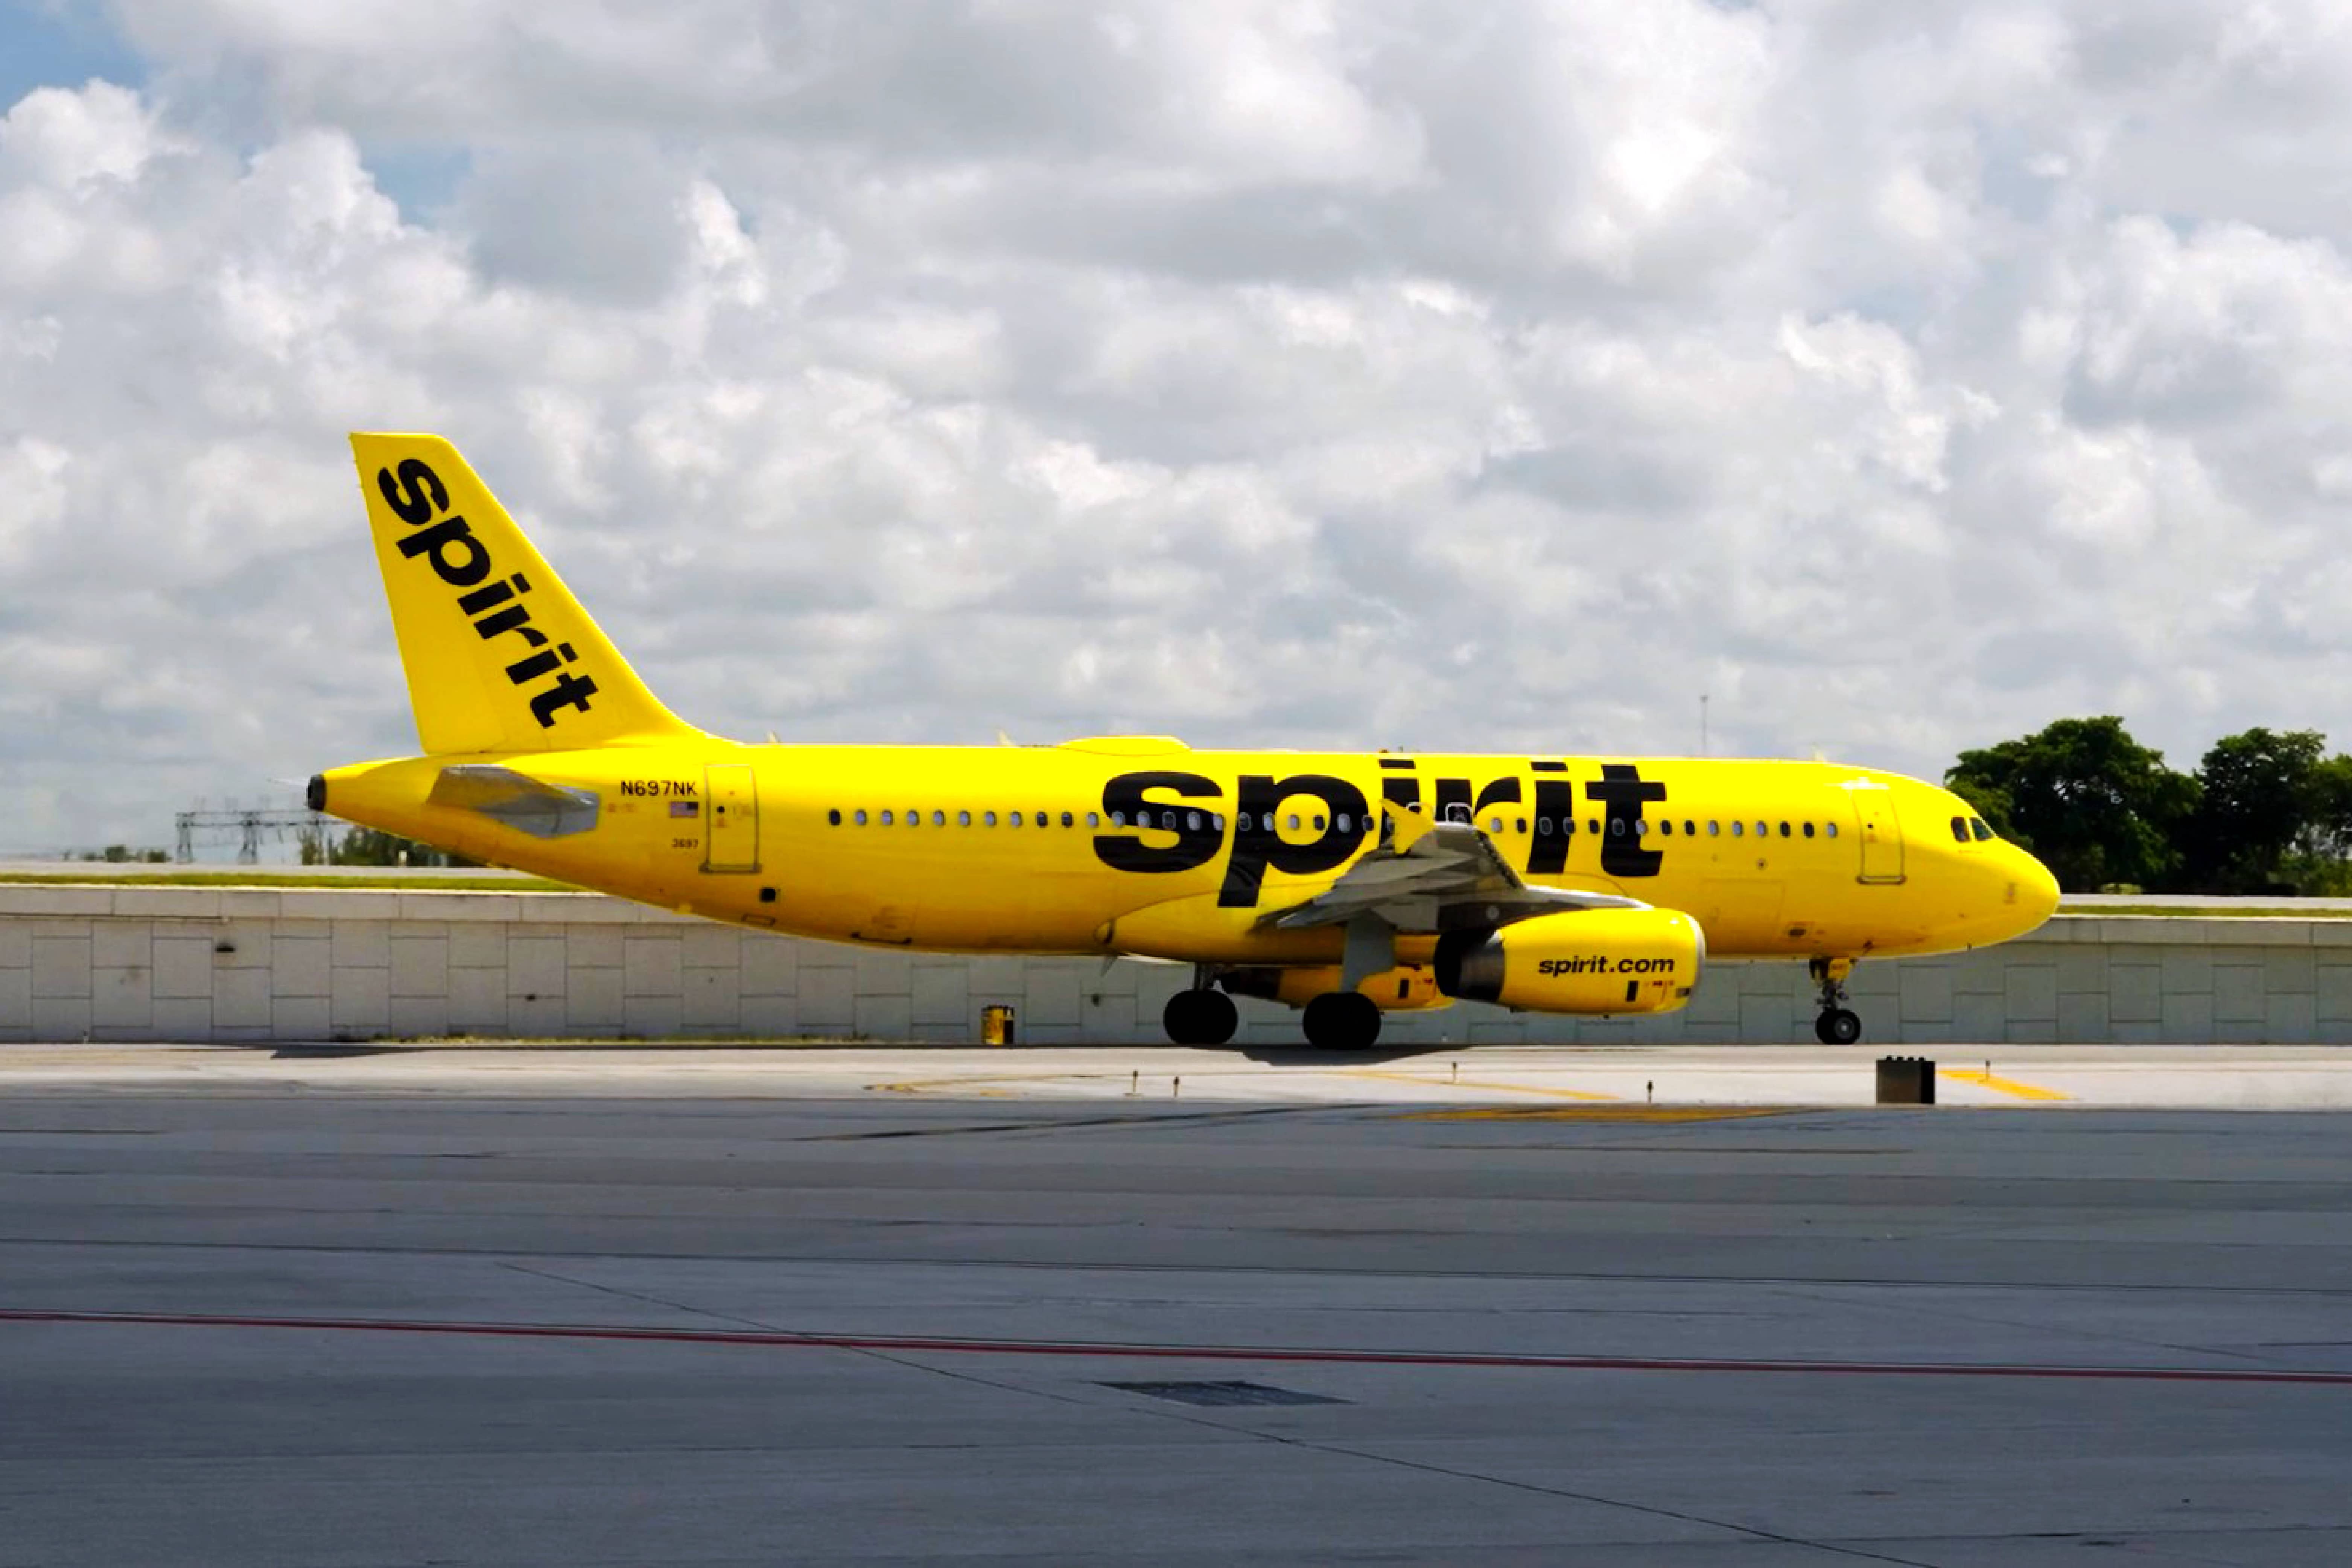 Spirit Airlines launching 4 new nonstop routes out of DTW